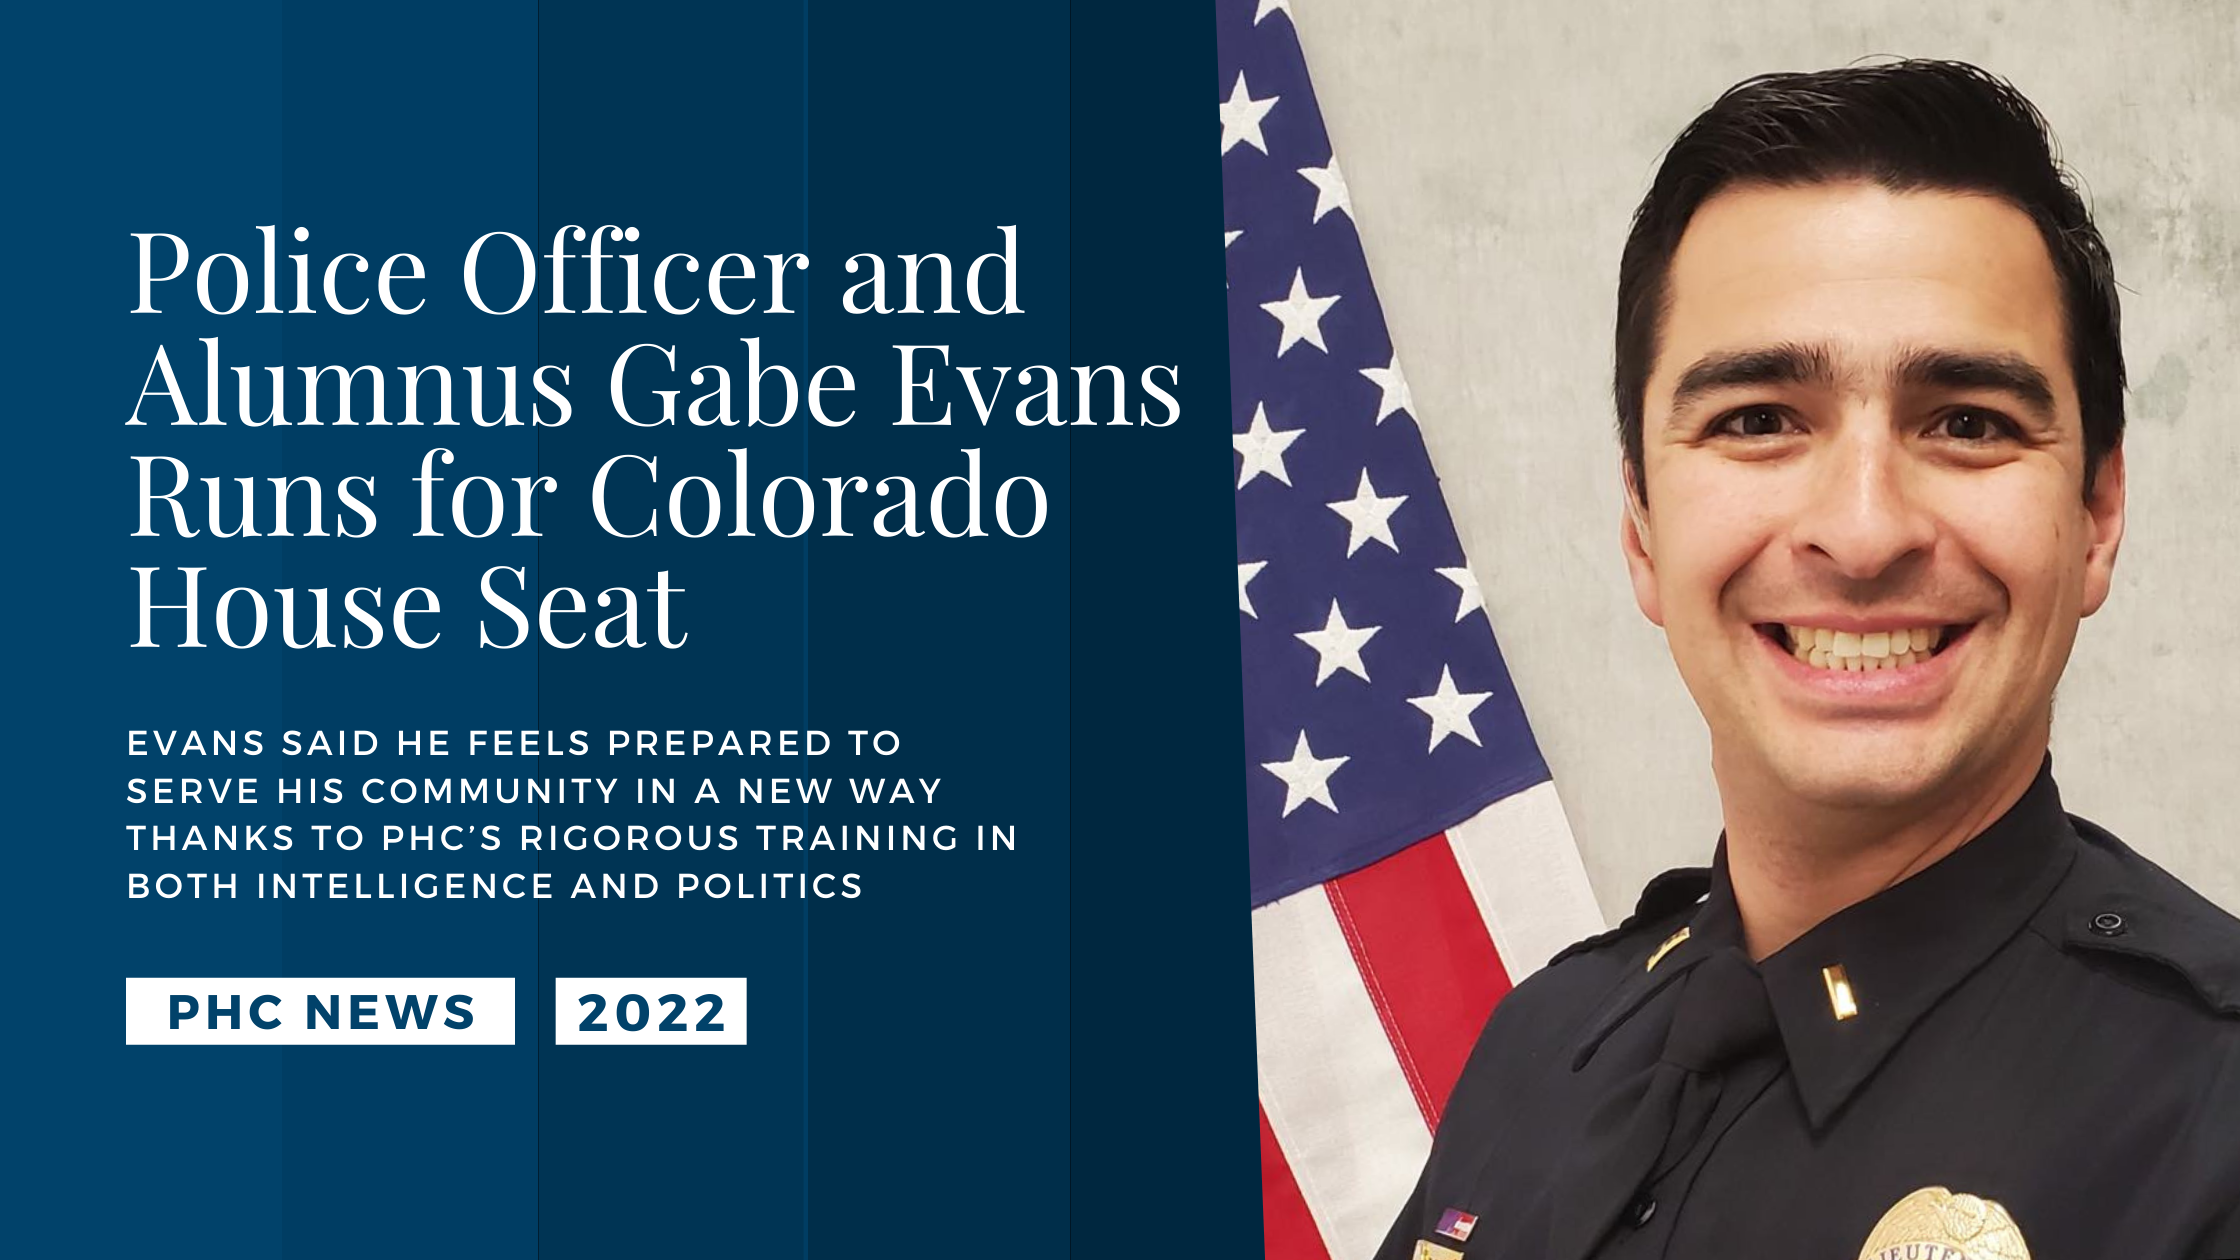 Police Officer and Alumnus Gabe Evans Runs for Colorado House Seat